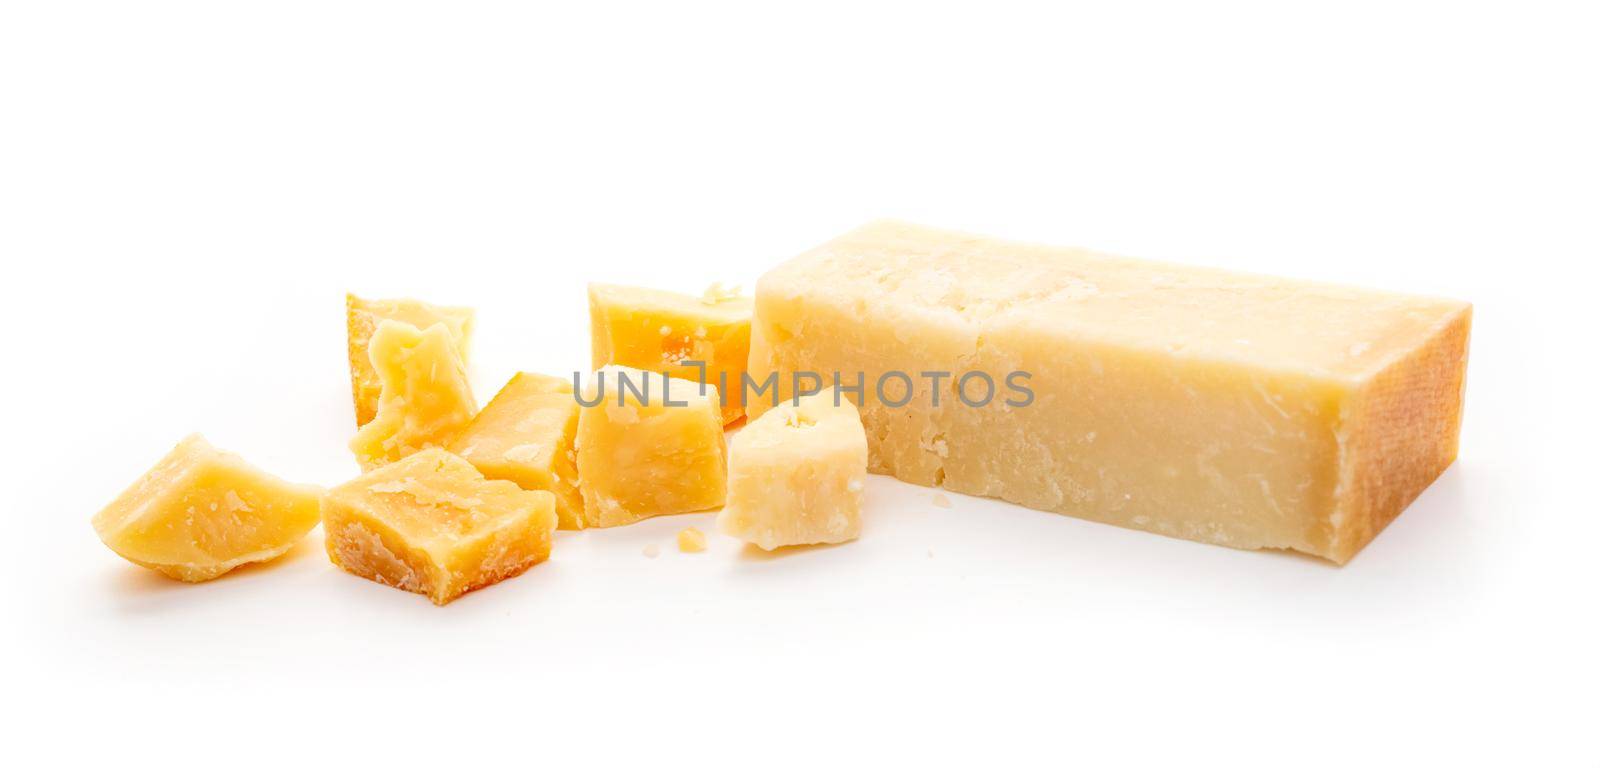 Piece of parmesan cheese and grater on white background